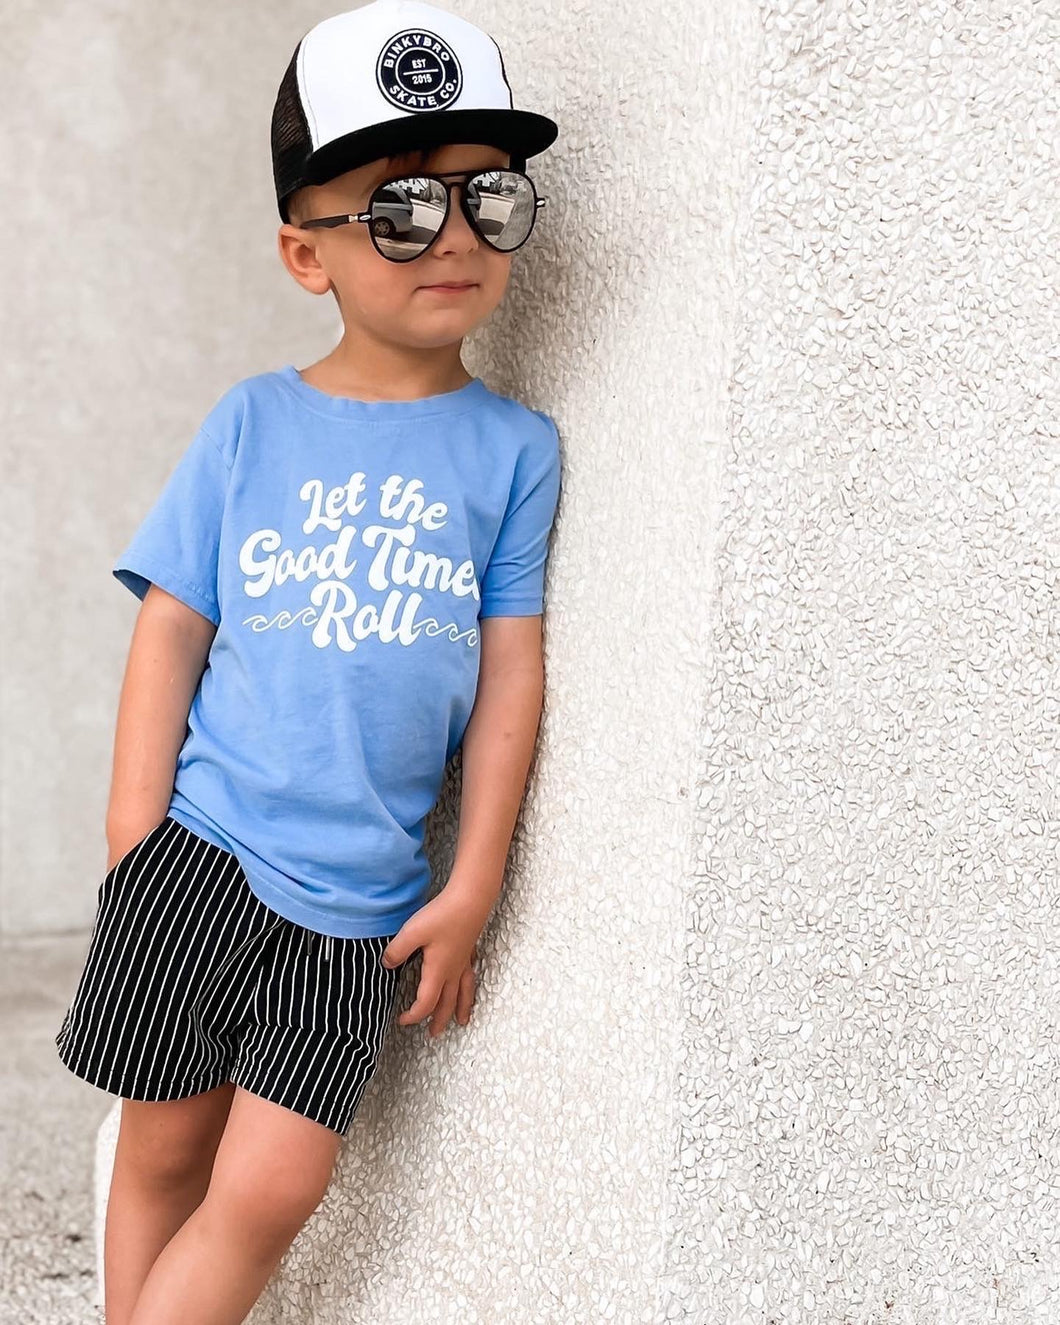 Let The Good Times Roll Kids Tee